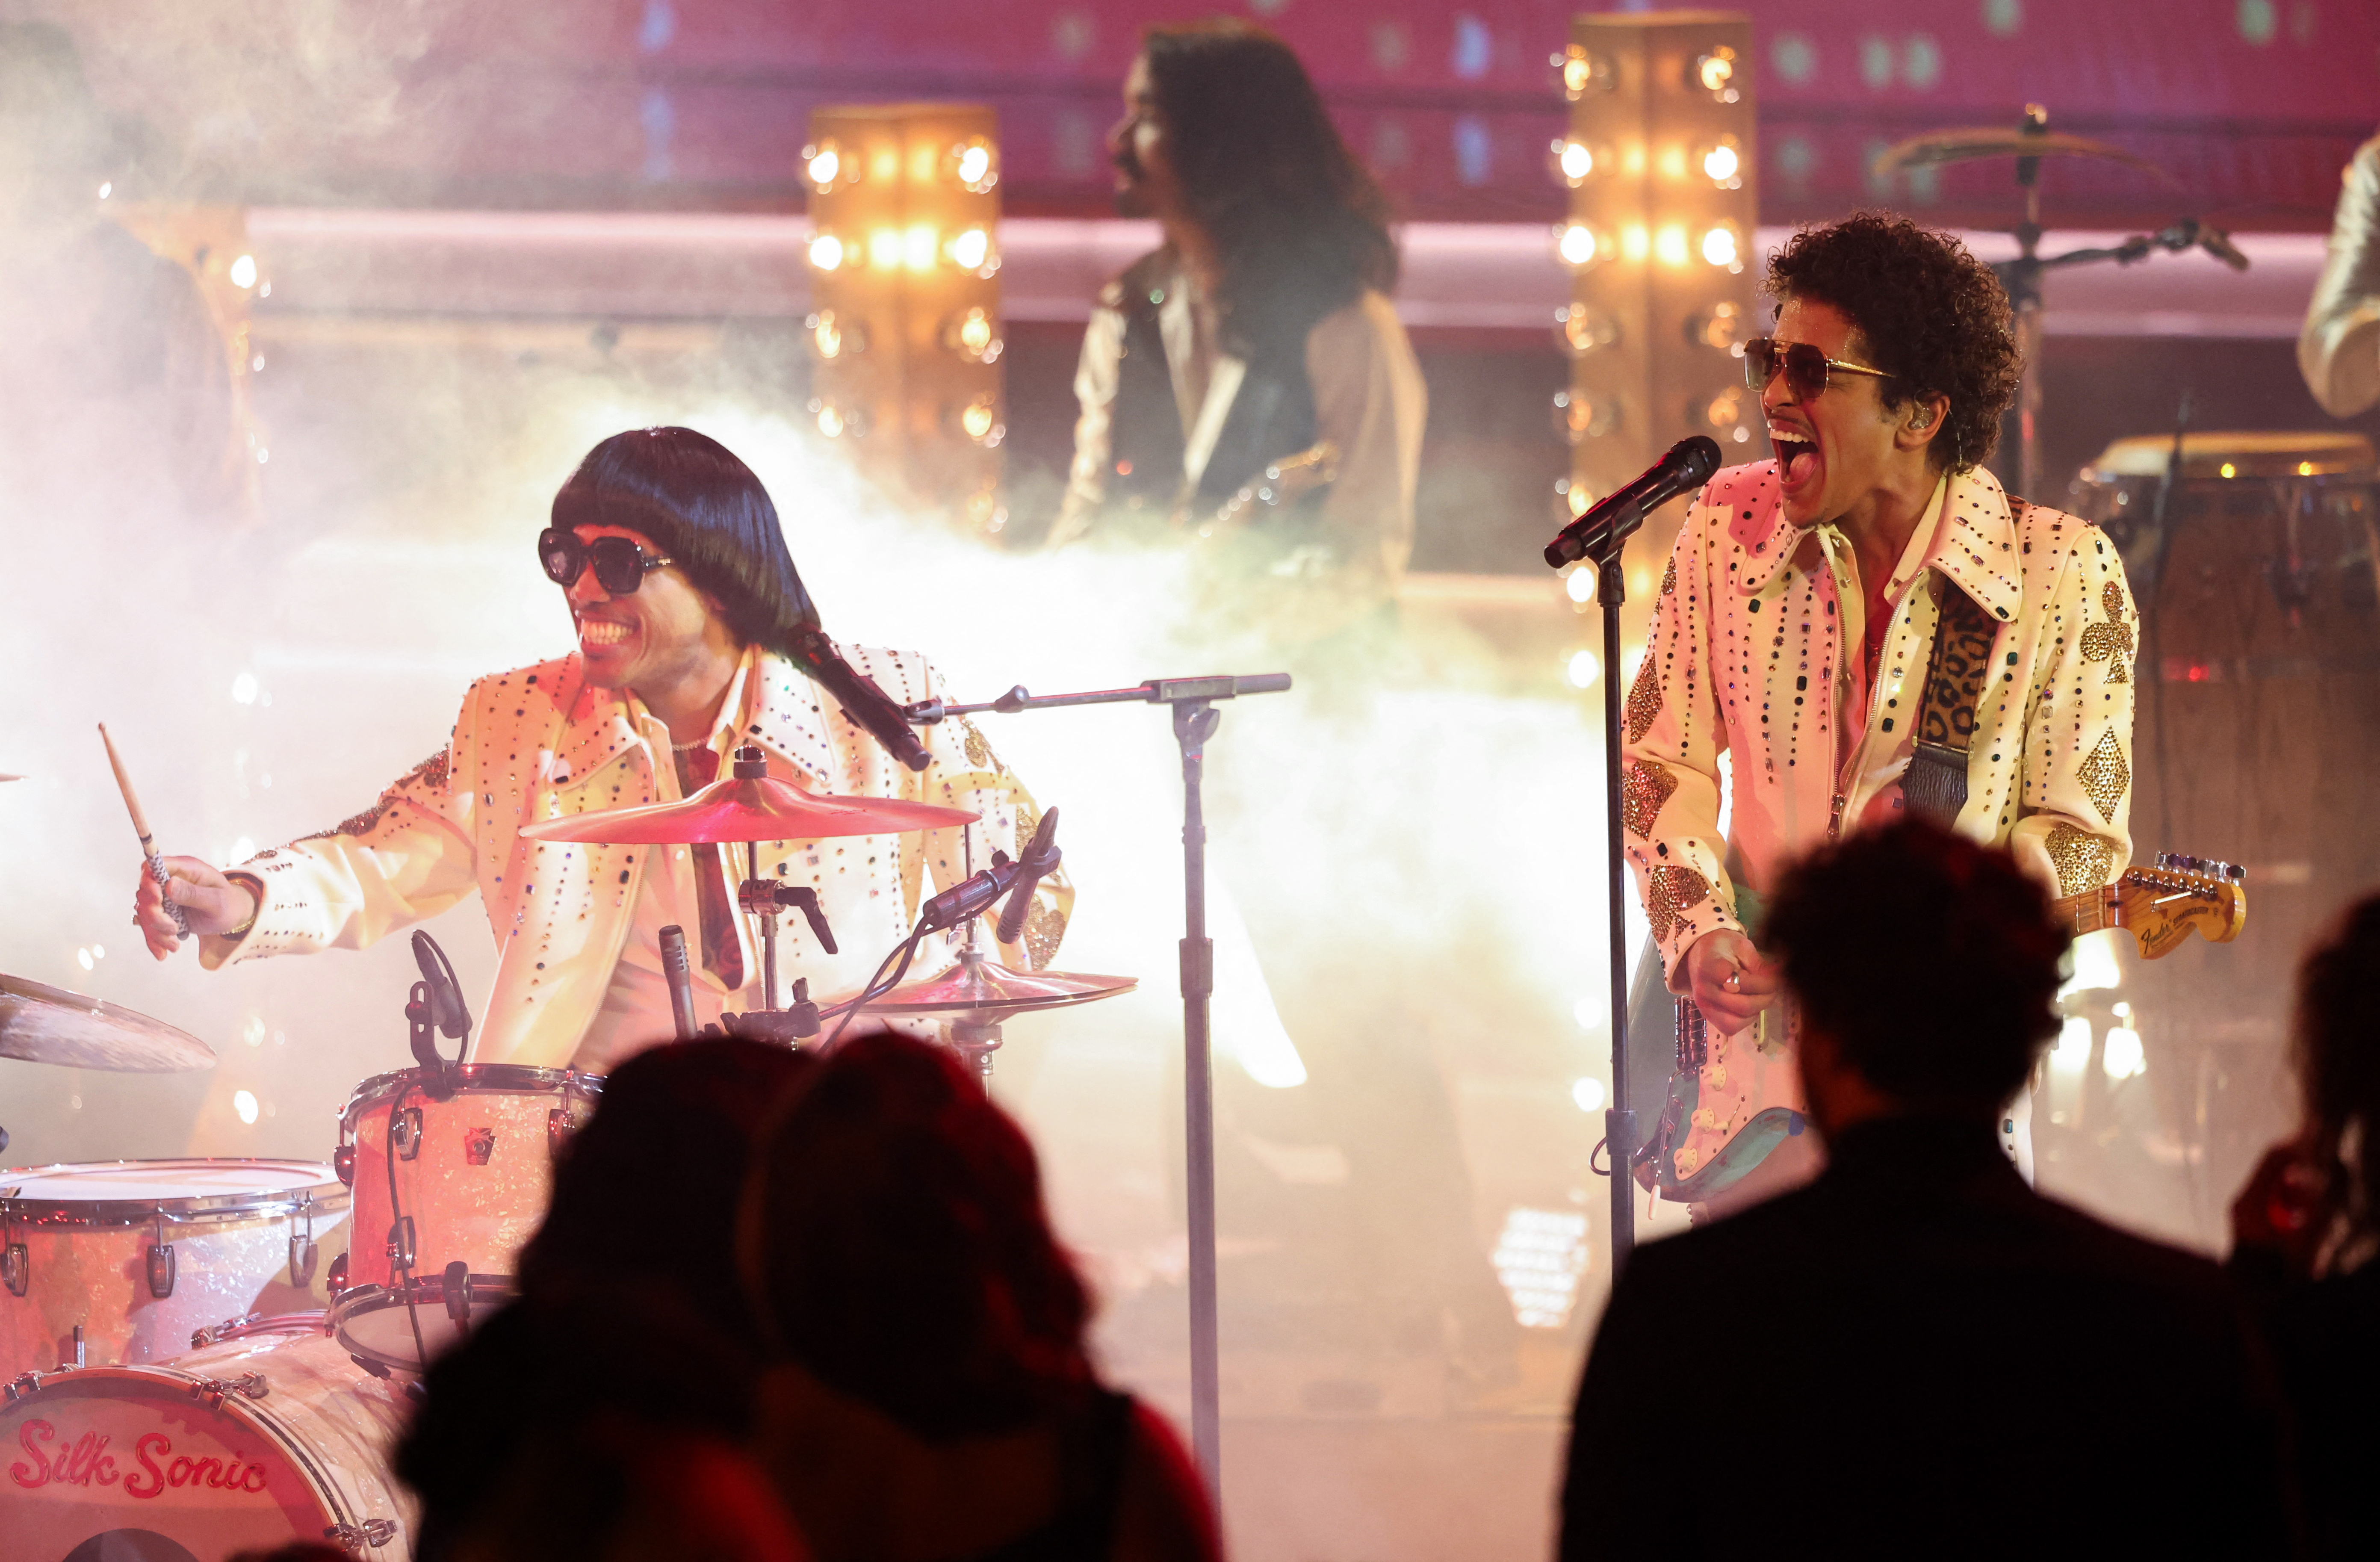 Anderson .Paak and Bruno Mars of Silk Sonic perform during the 64th Annual Grammy Awards show at the MGM Grand Garden Arena in Las Vegas, Nevada, U.S., April 3, 2022. REUTERS/Mario Anzuoni